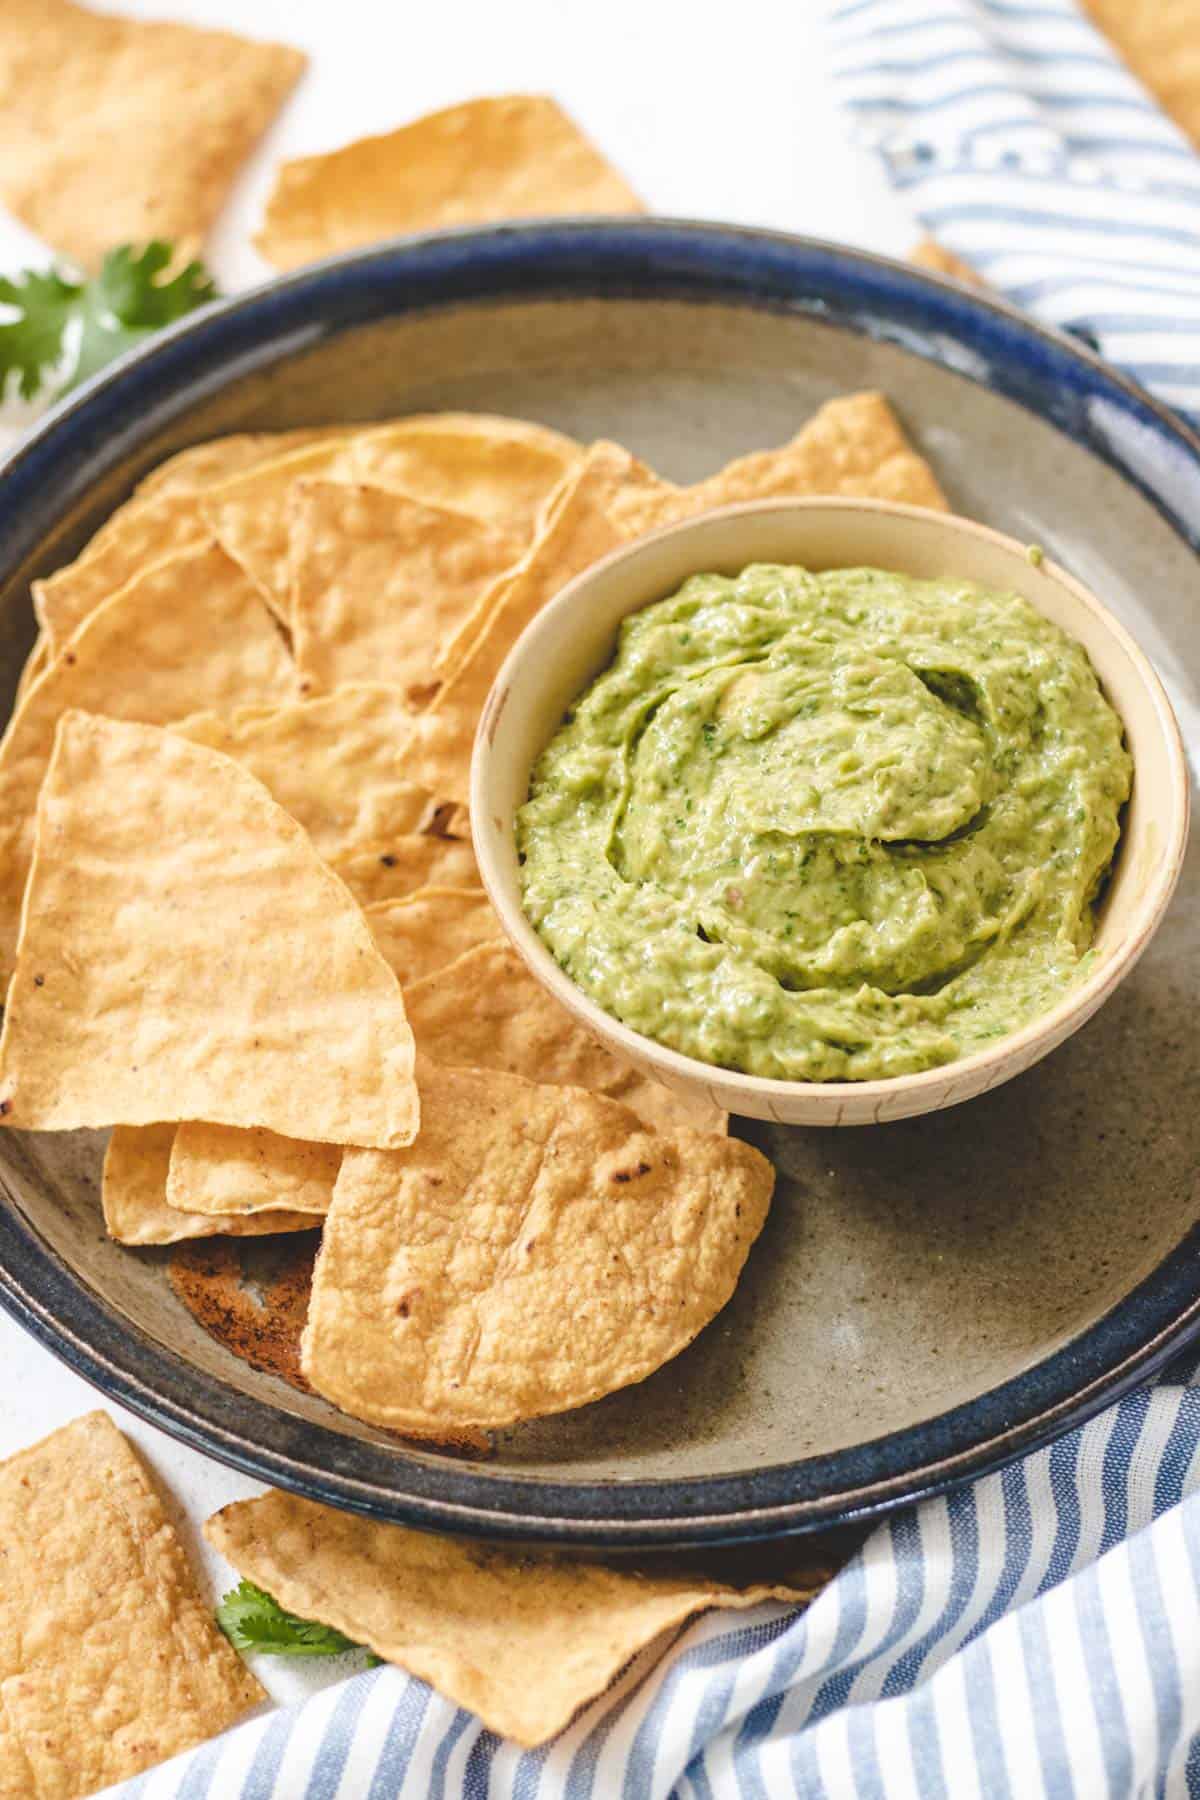 A large plate with tortilla chips and a small bowl of guacamole.